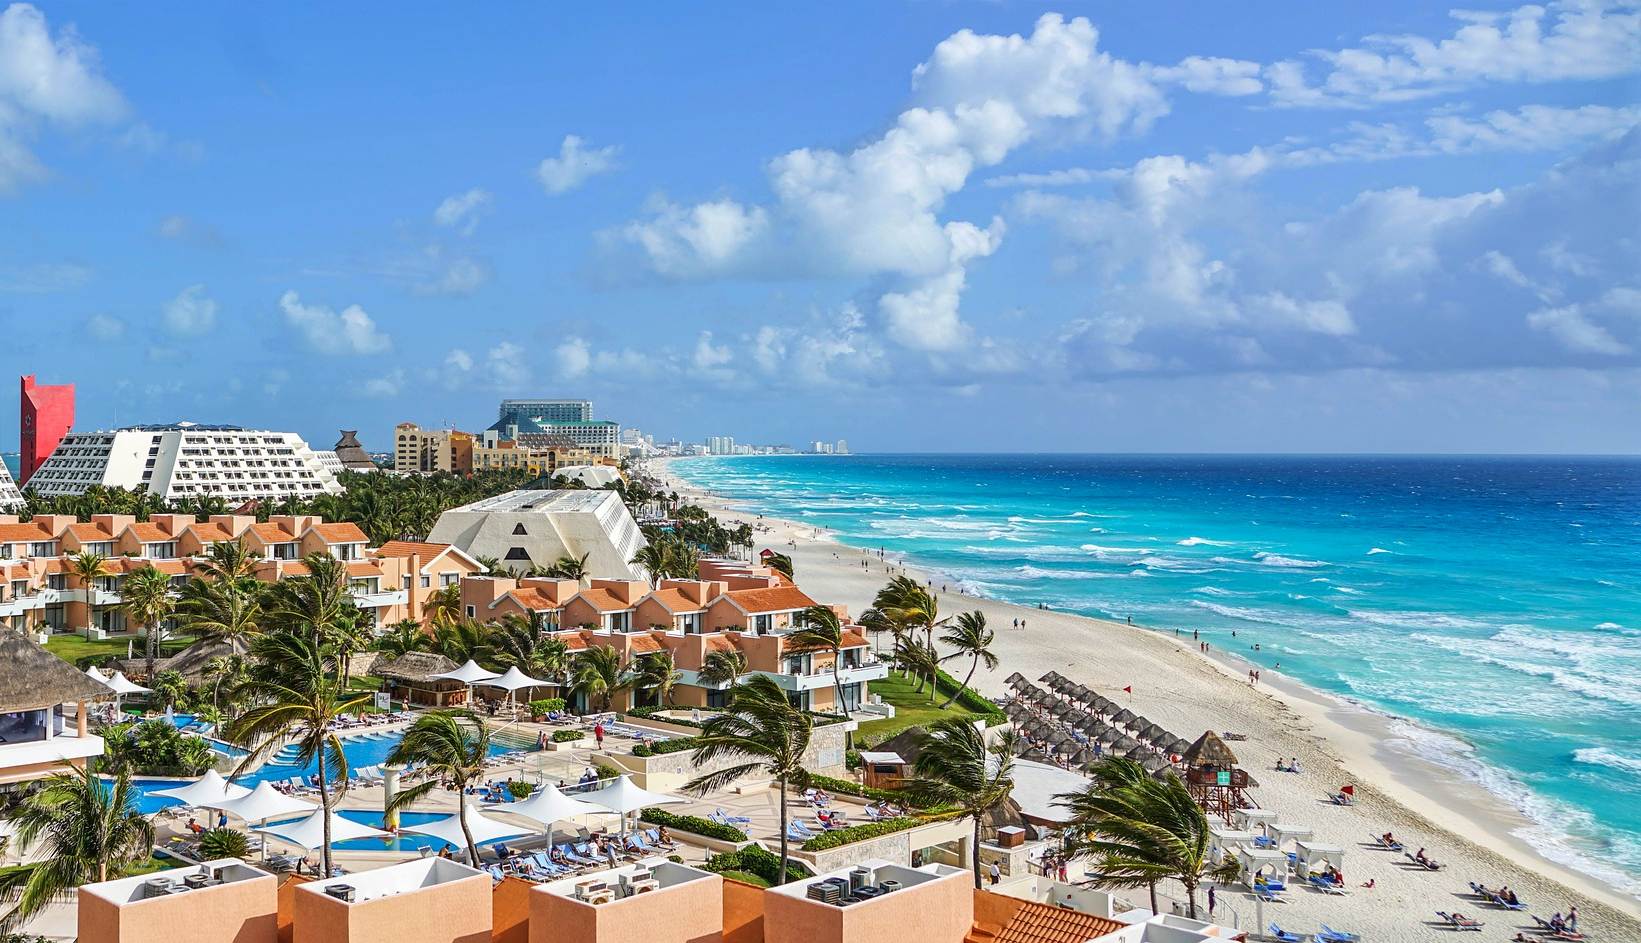 Family vacation in Cancun, Mexico